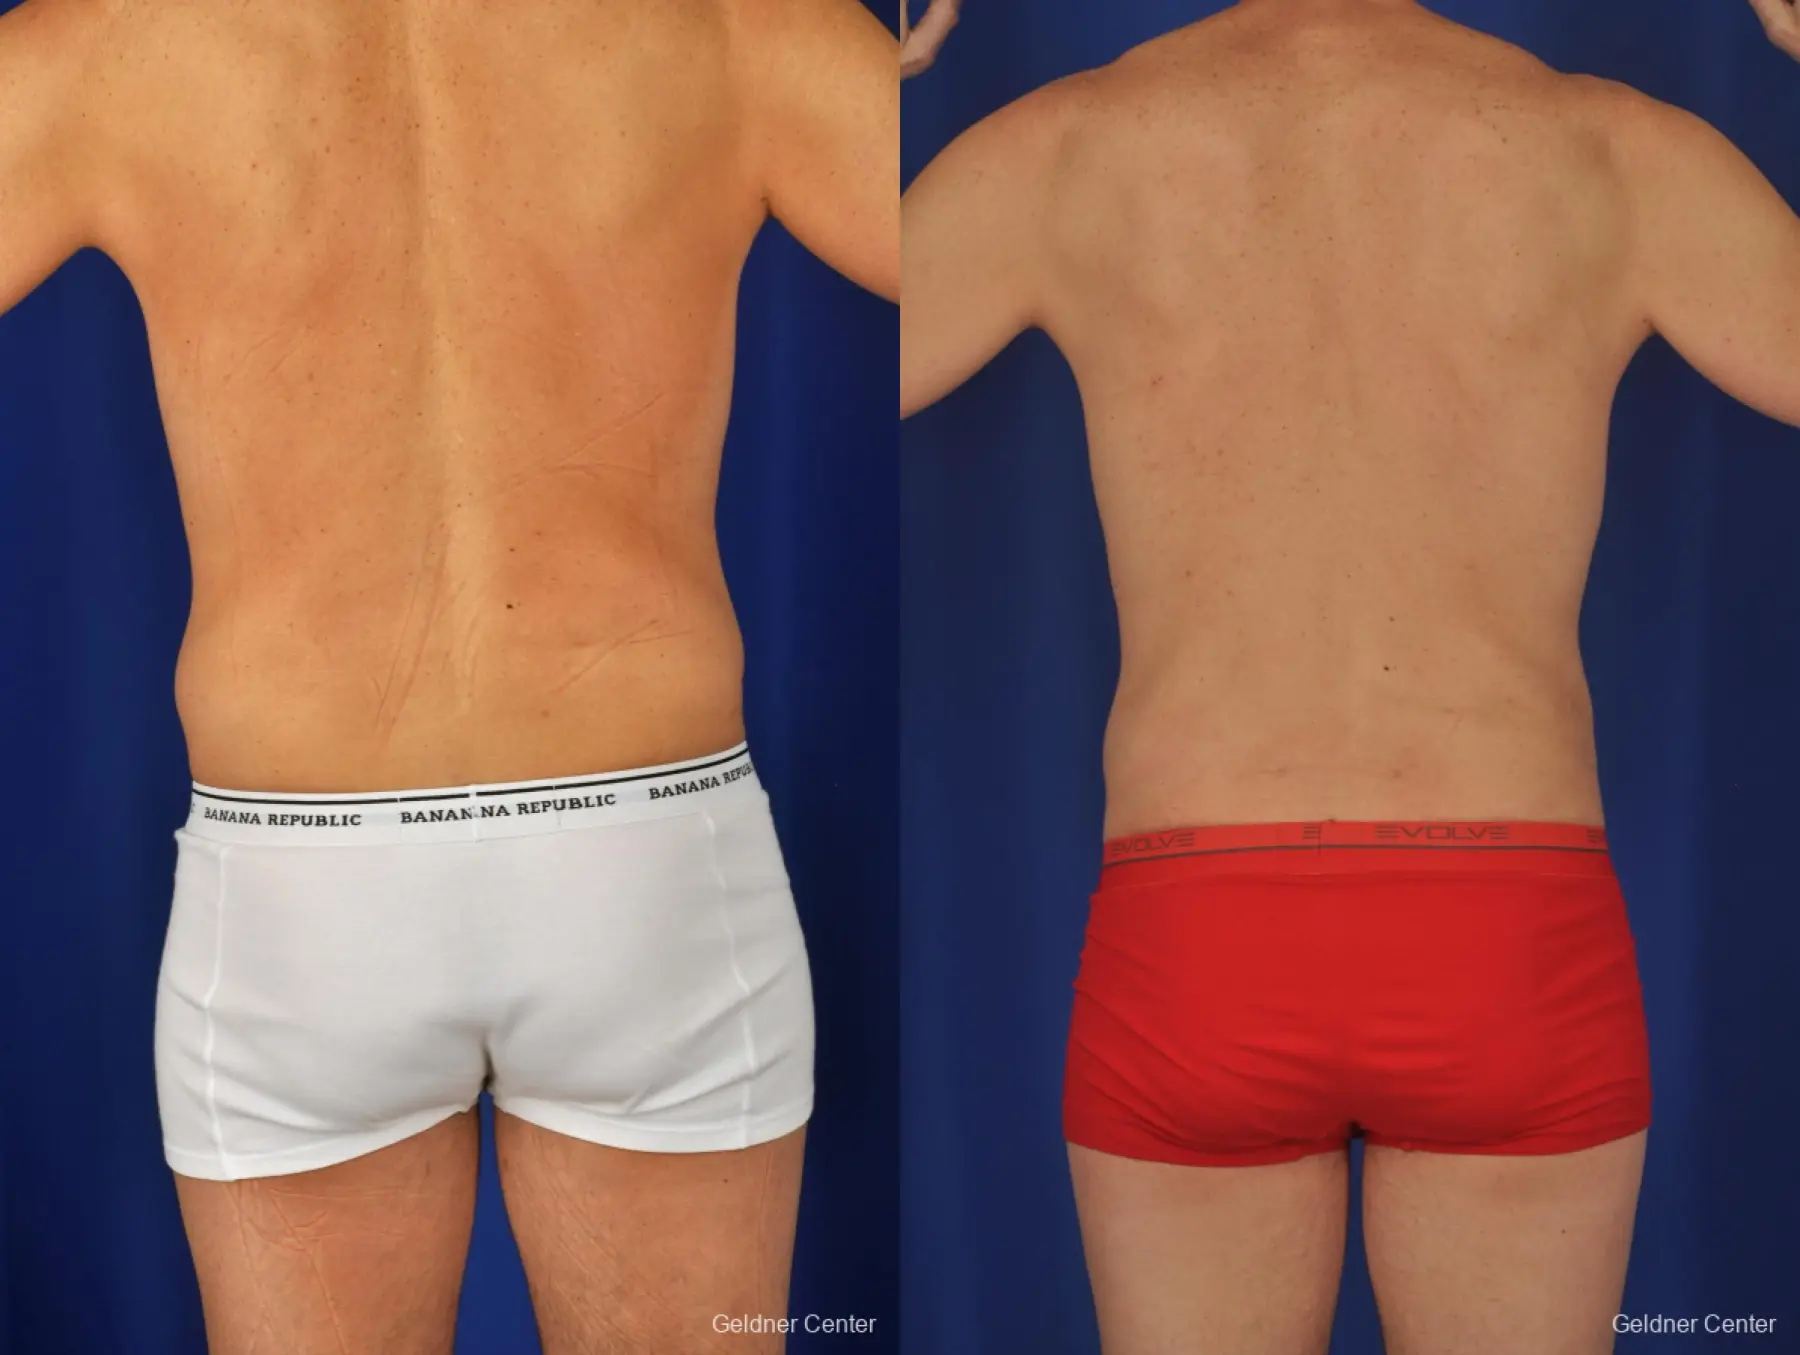 Liposuction For Men: Patient 2 - Before and After 4